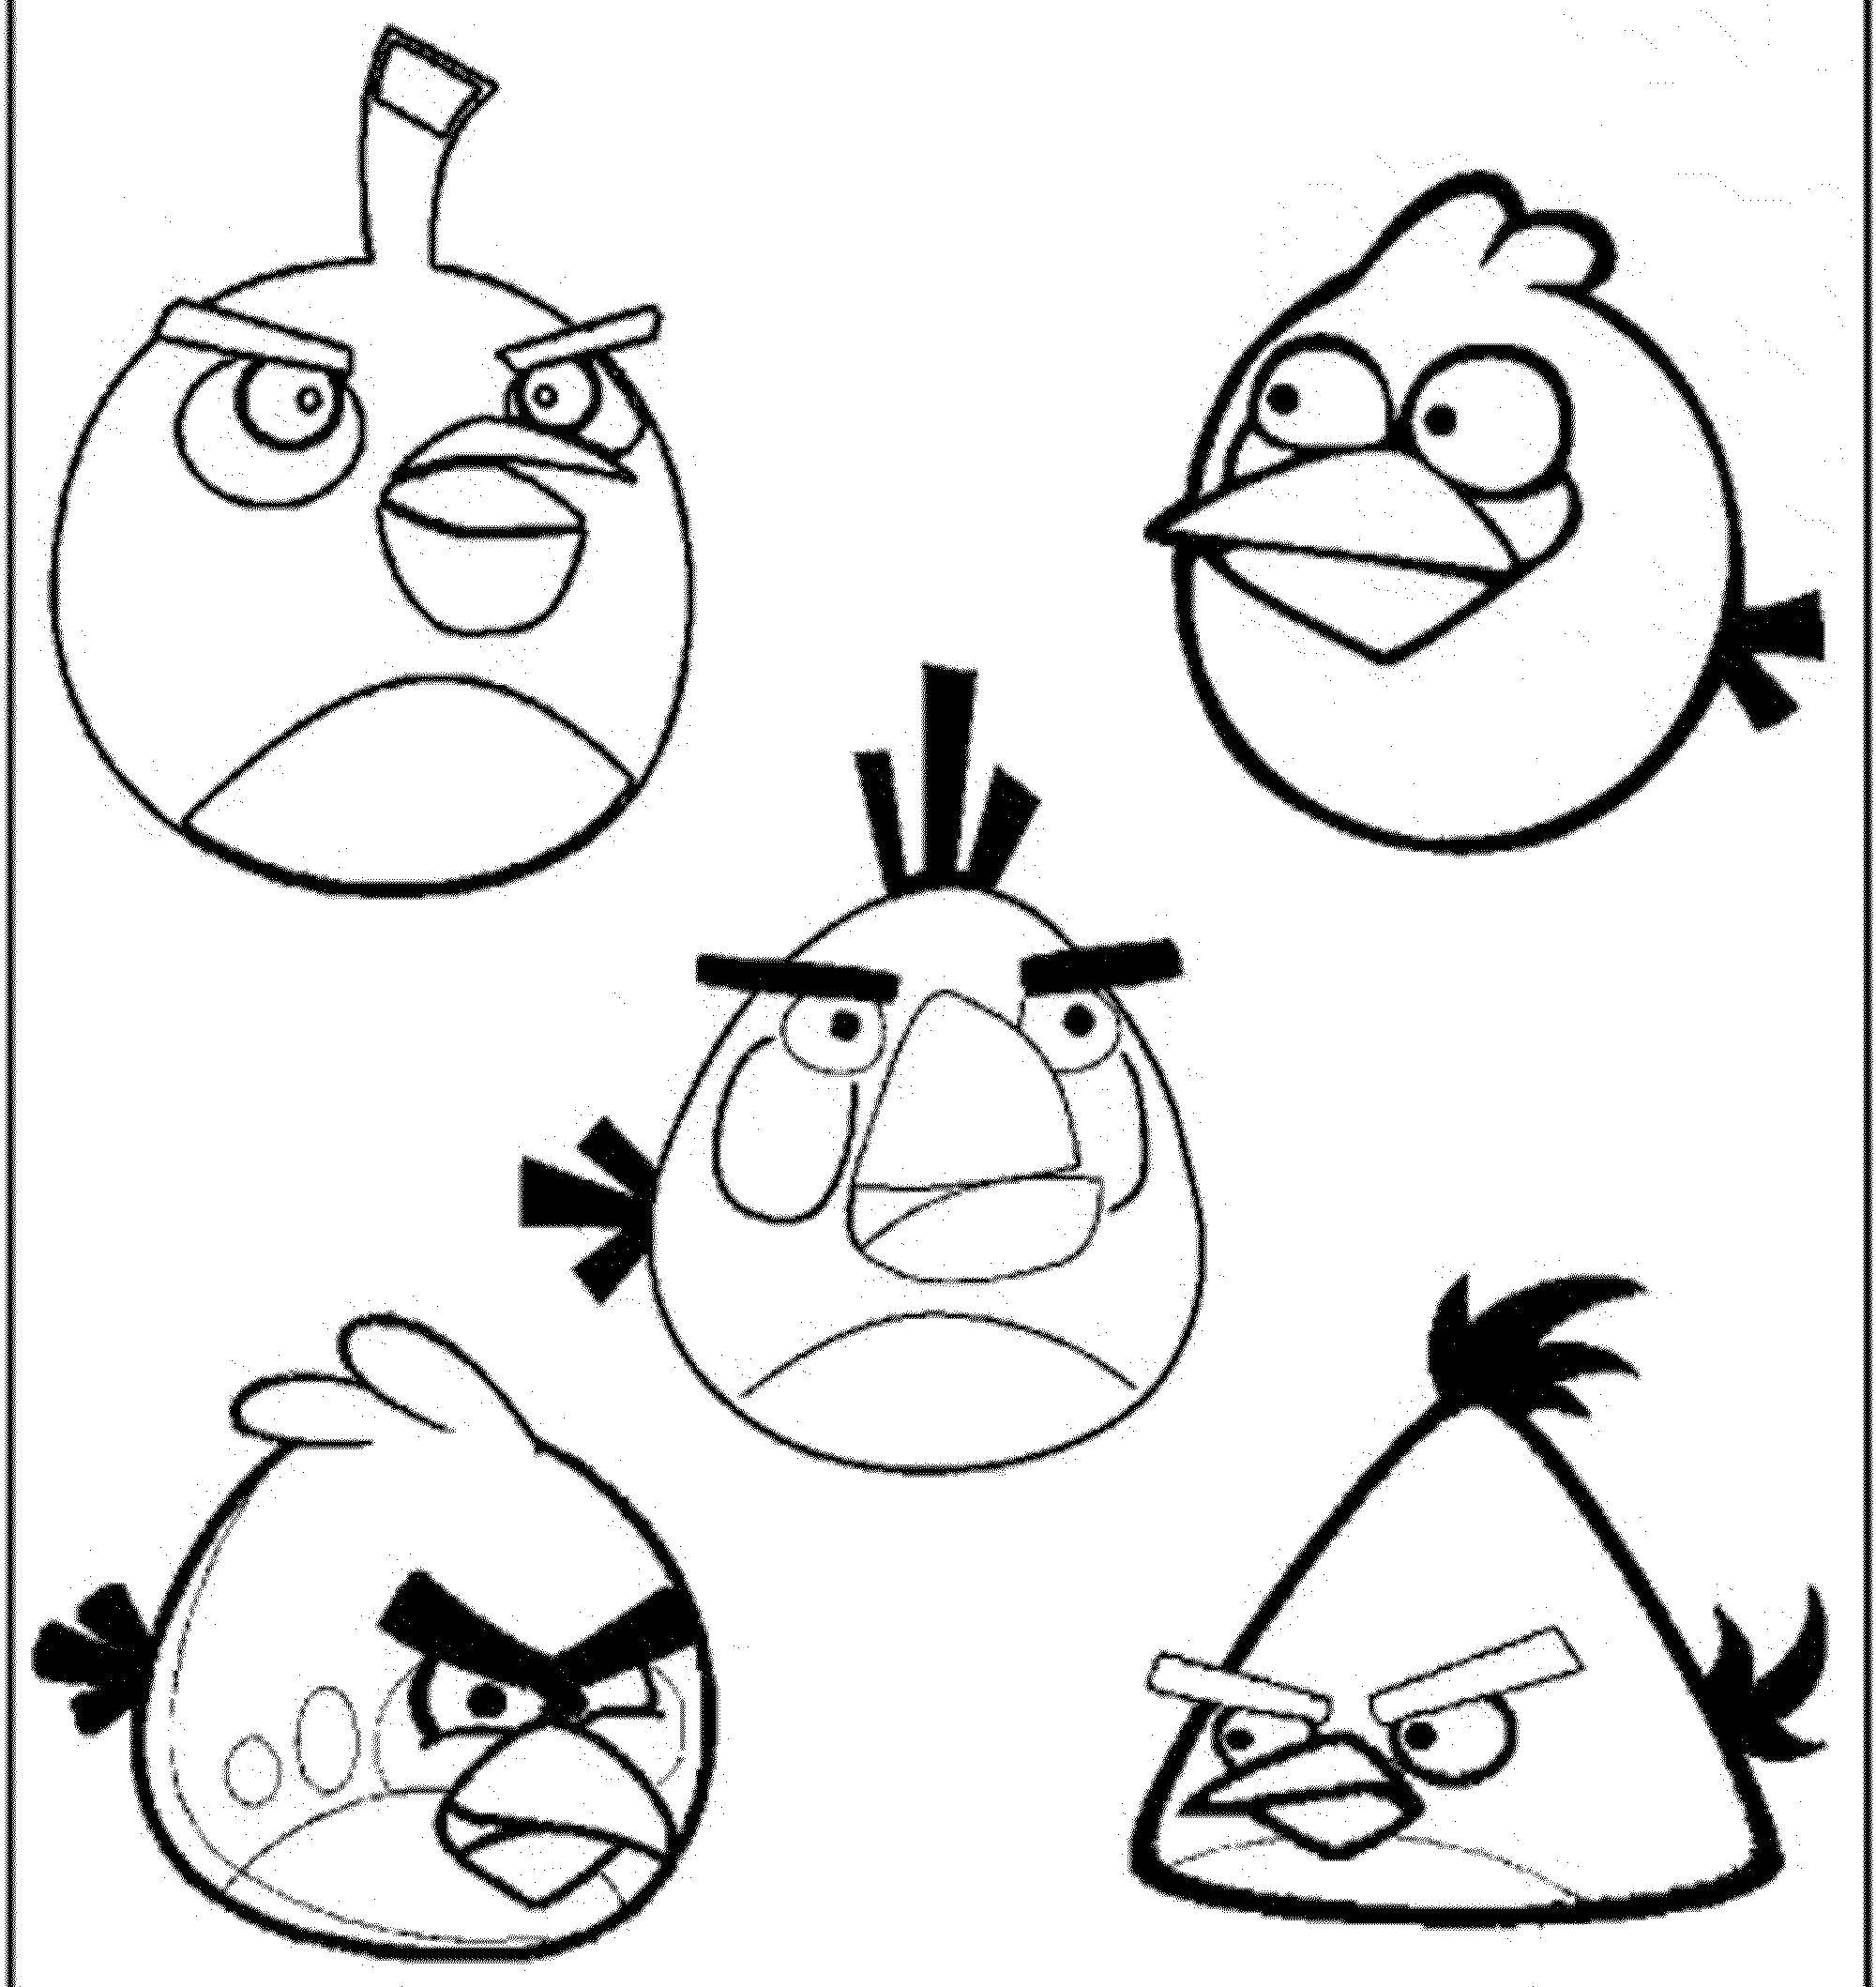 Coloring The birds from angry birds . Category The character from the game. Tags:  Games, Angry Birds .